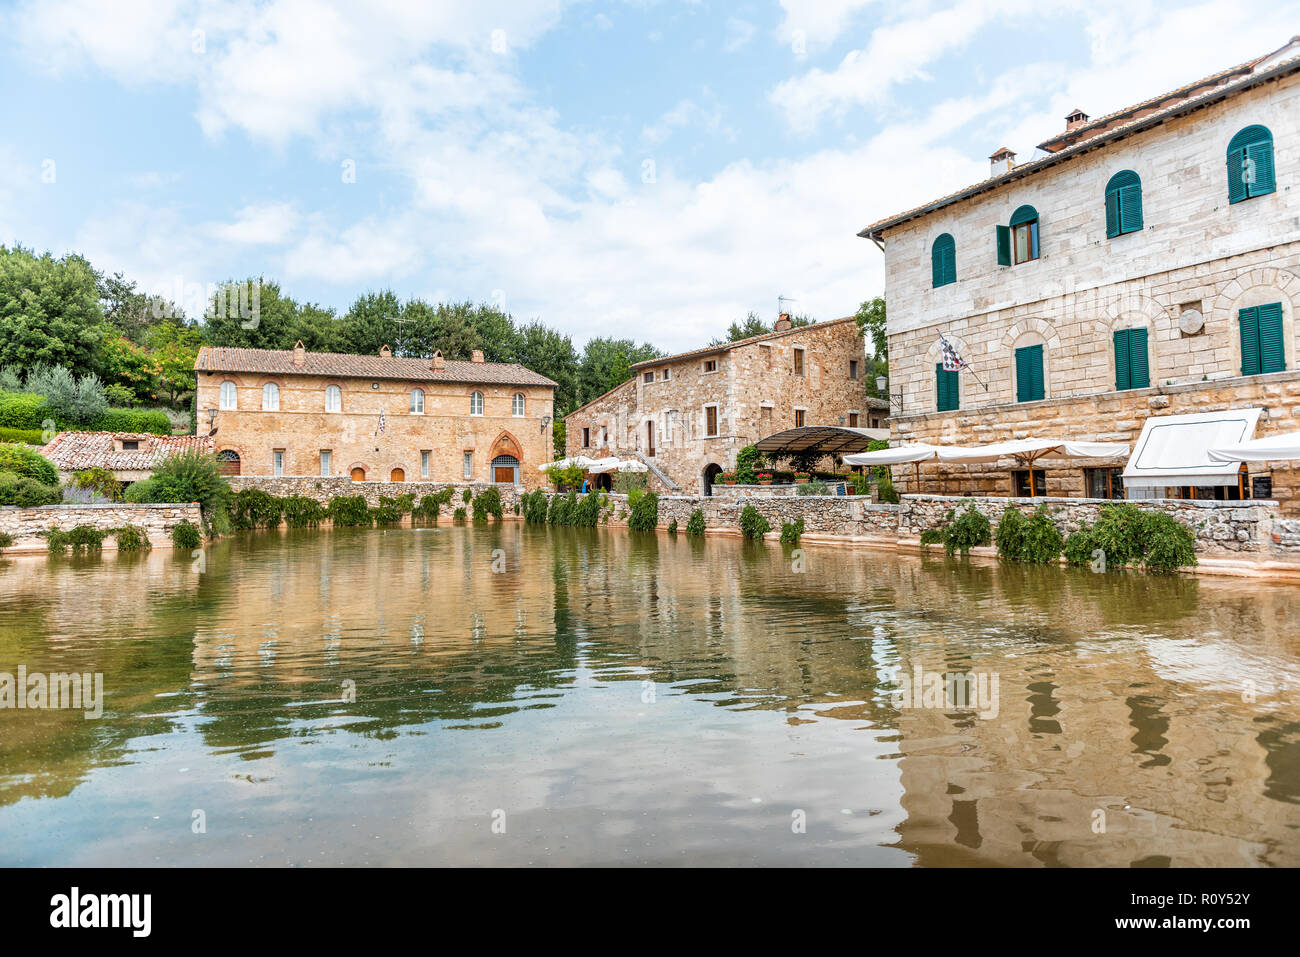 Medieval town of Bagno Vignoni, San Quirico d'Orcia, Val d'Orcia, Tuscany,  Italy with hot springs ruins, historical buildings, water pool reflection  Stock Photo - Alamy